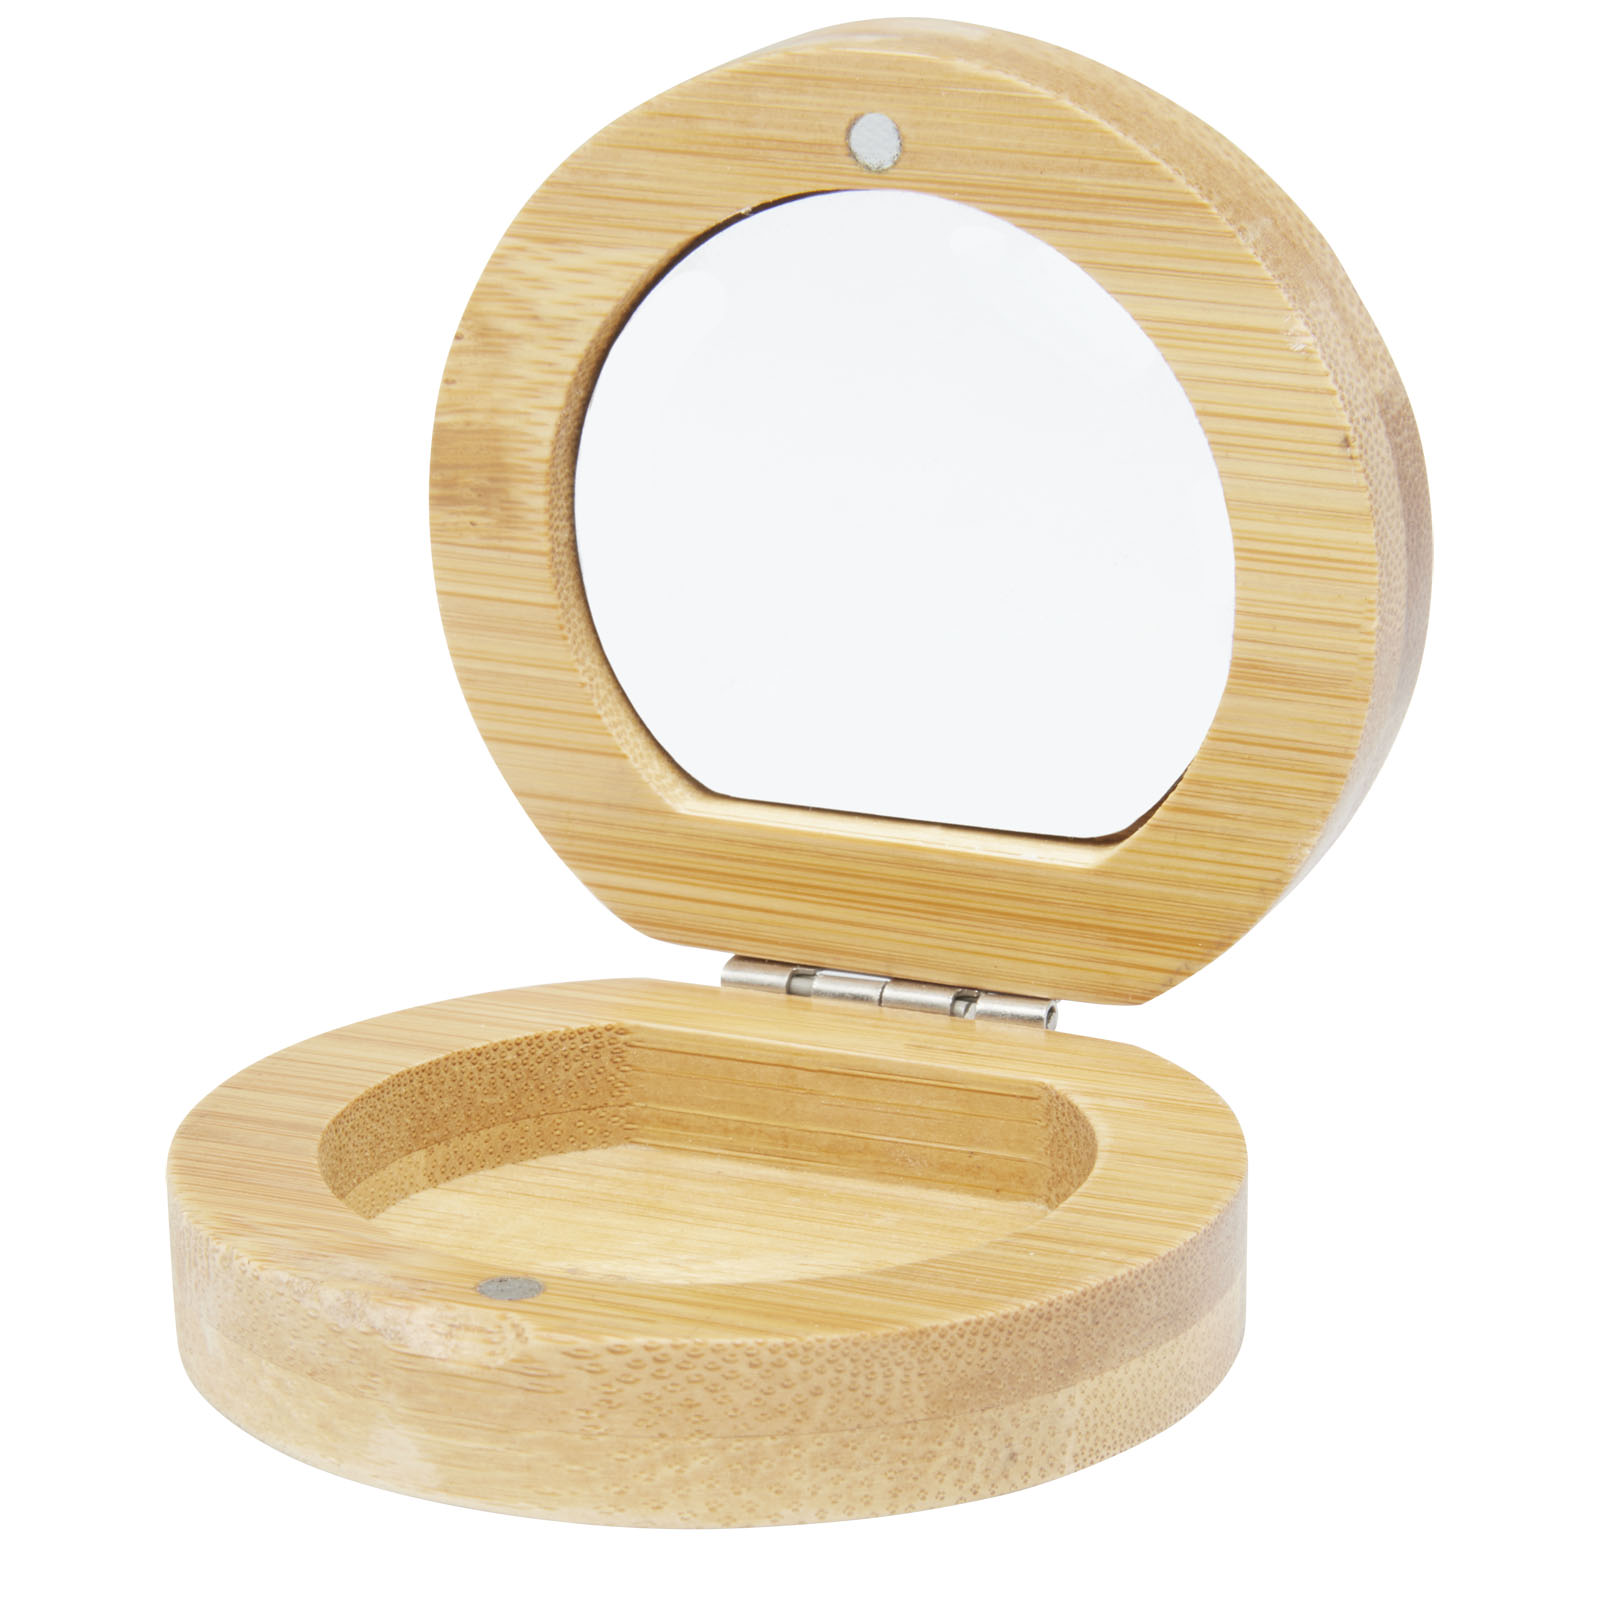 Advertising Personal Care - Afrodit bamboo pocket mirror